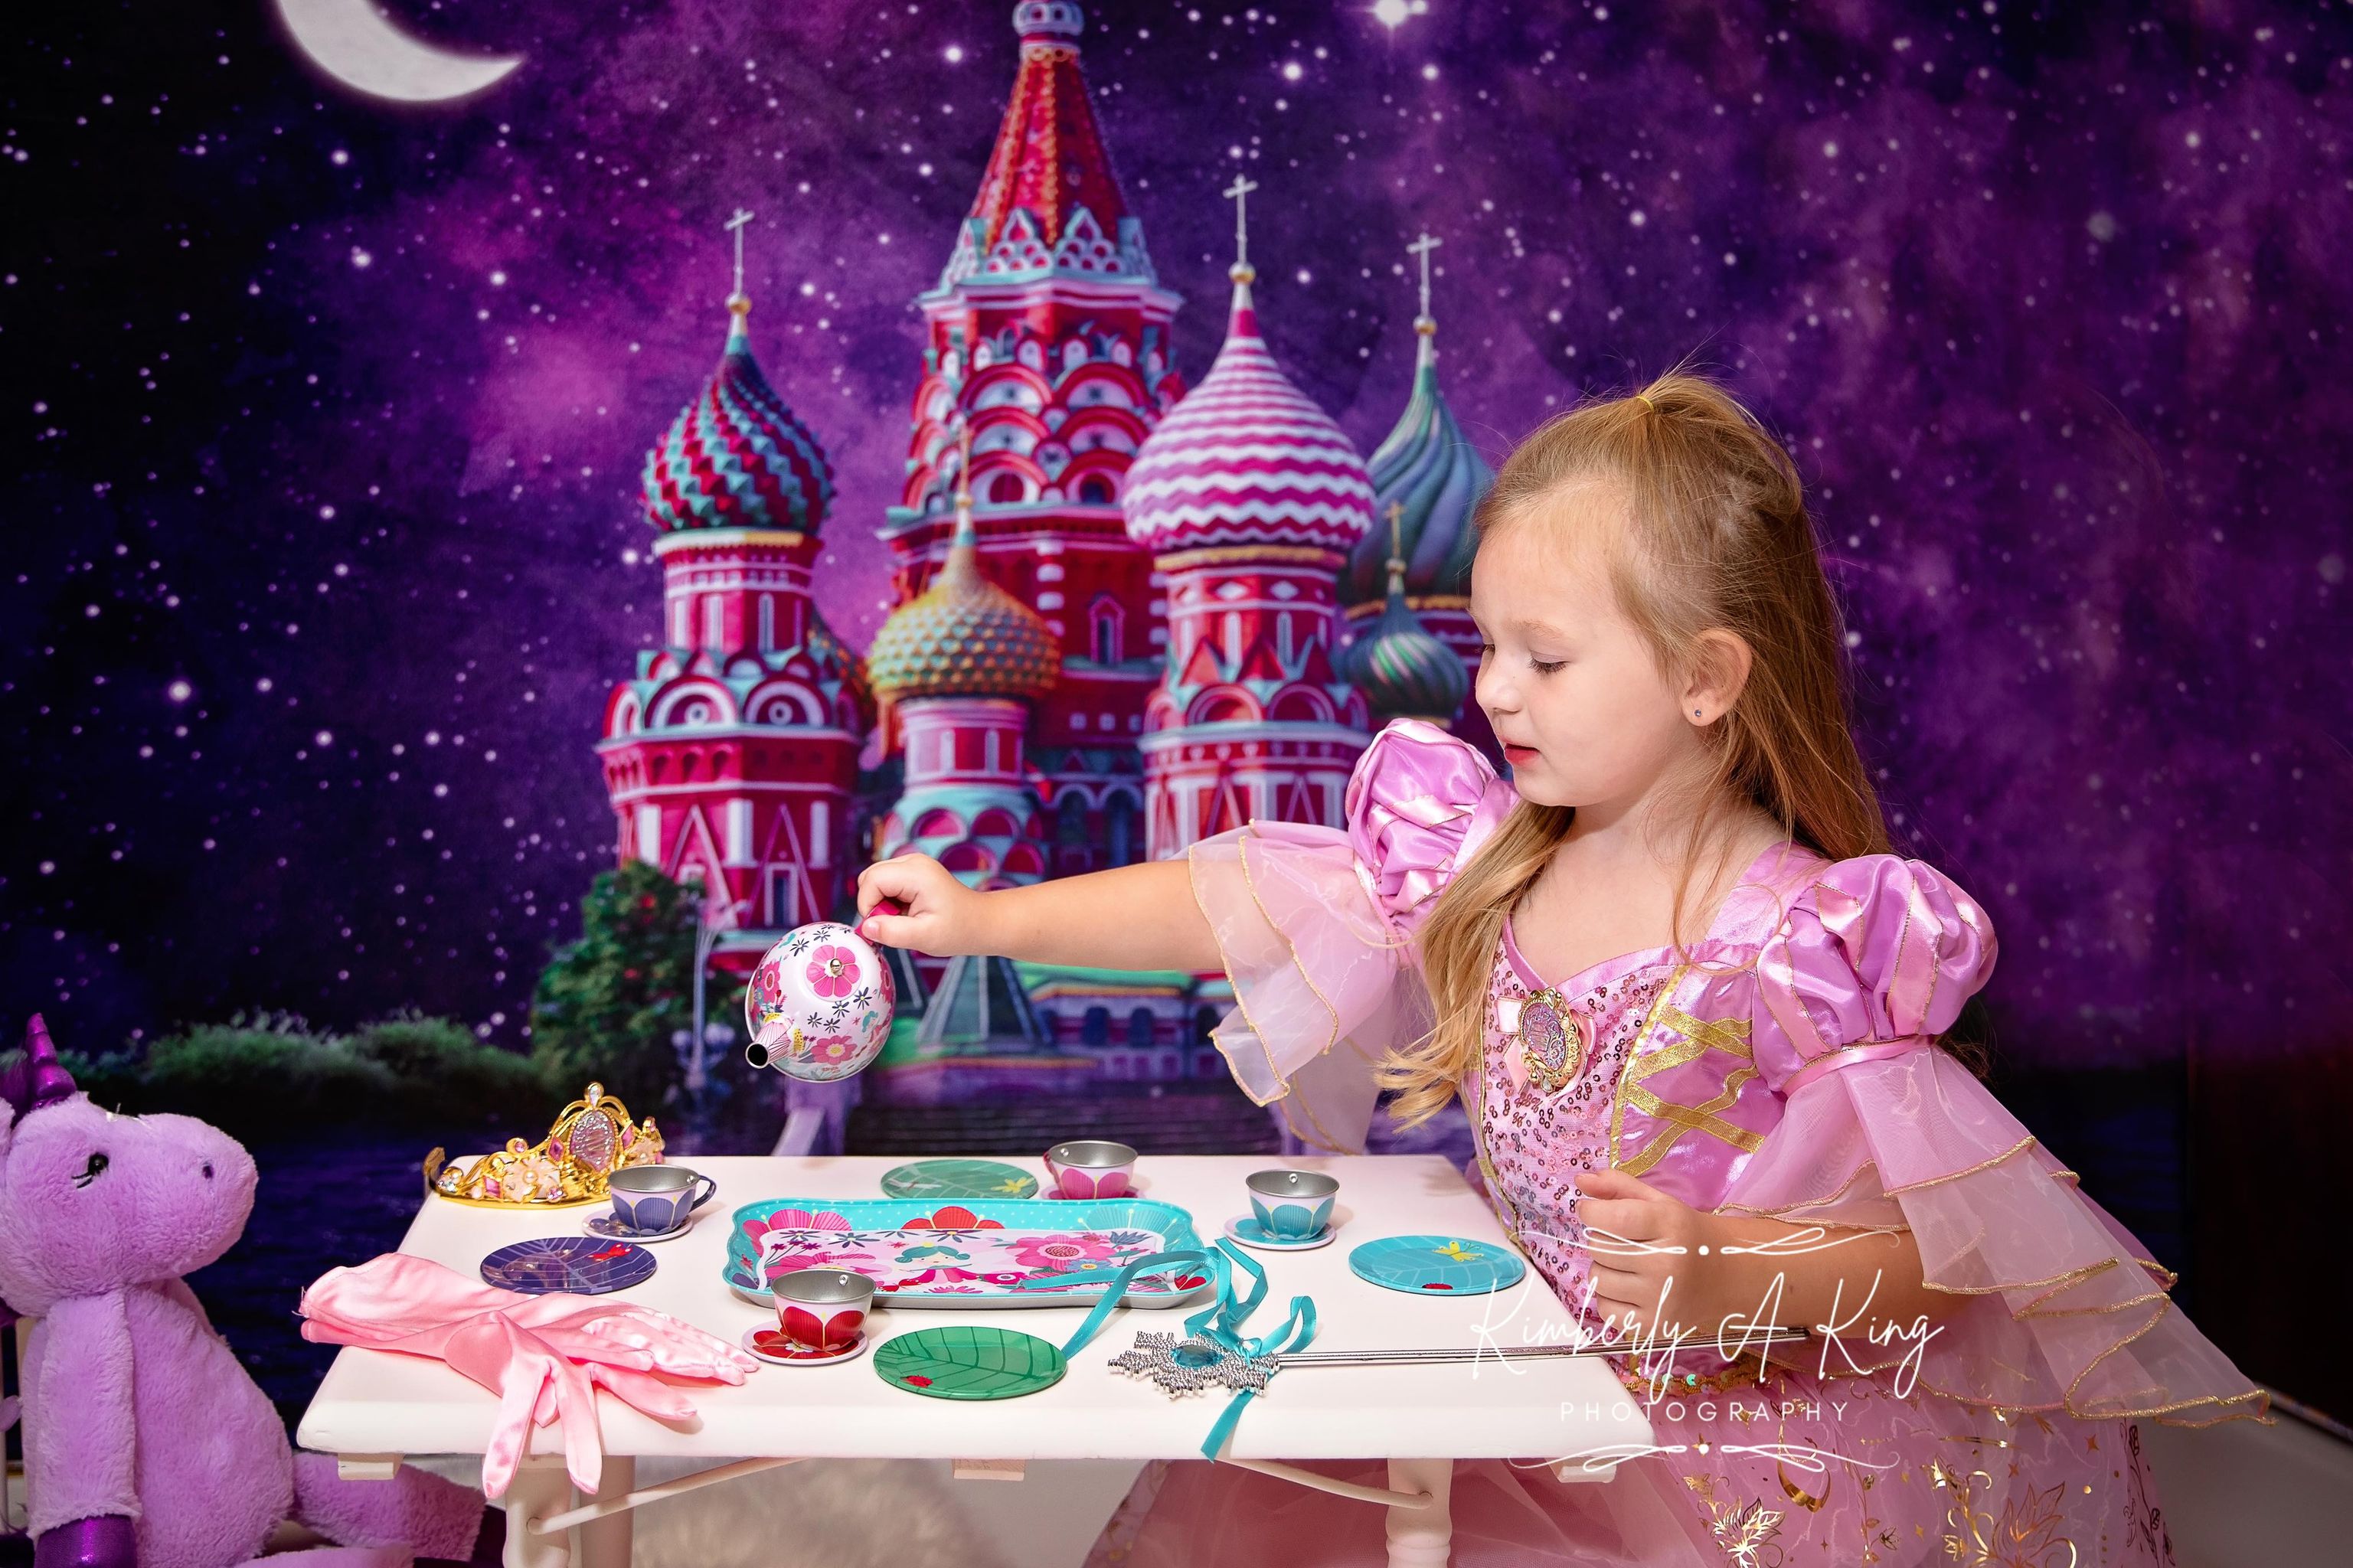 Kate Starry Night Castle/Cathedral Backdrop Moon Purple for Photography